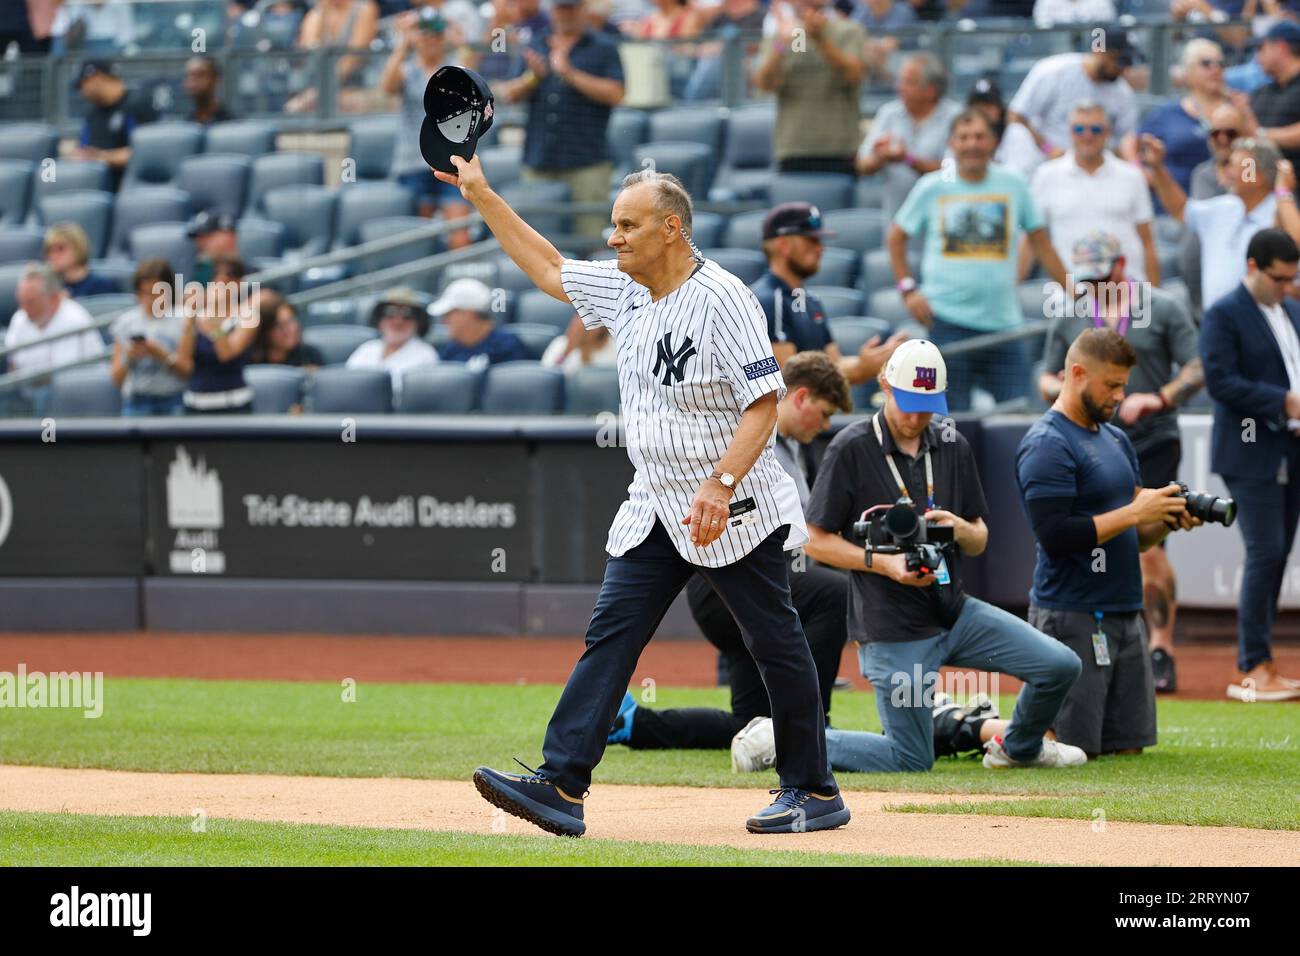 BRONX, NY - SEPTEMBER 09: Joe Torre is introduced during the 75th